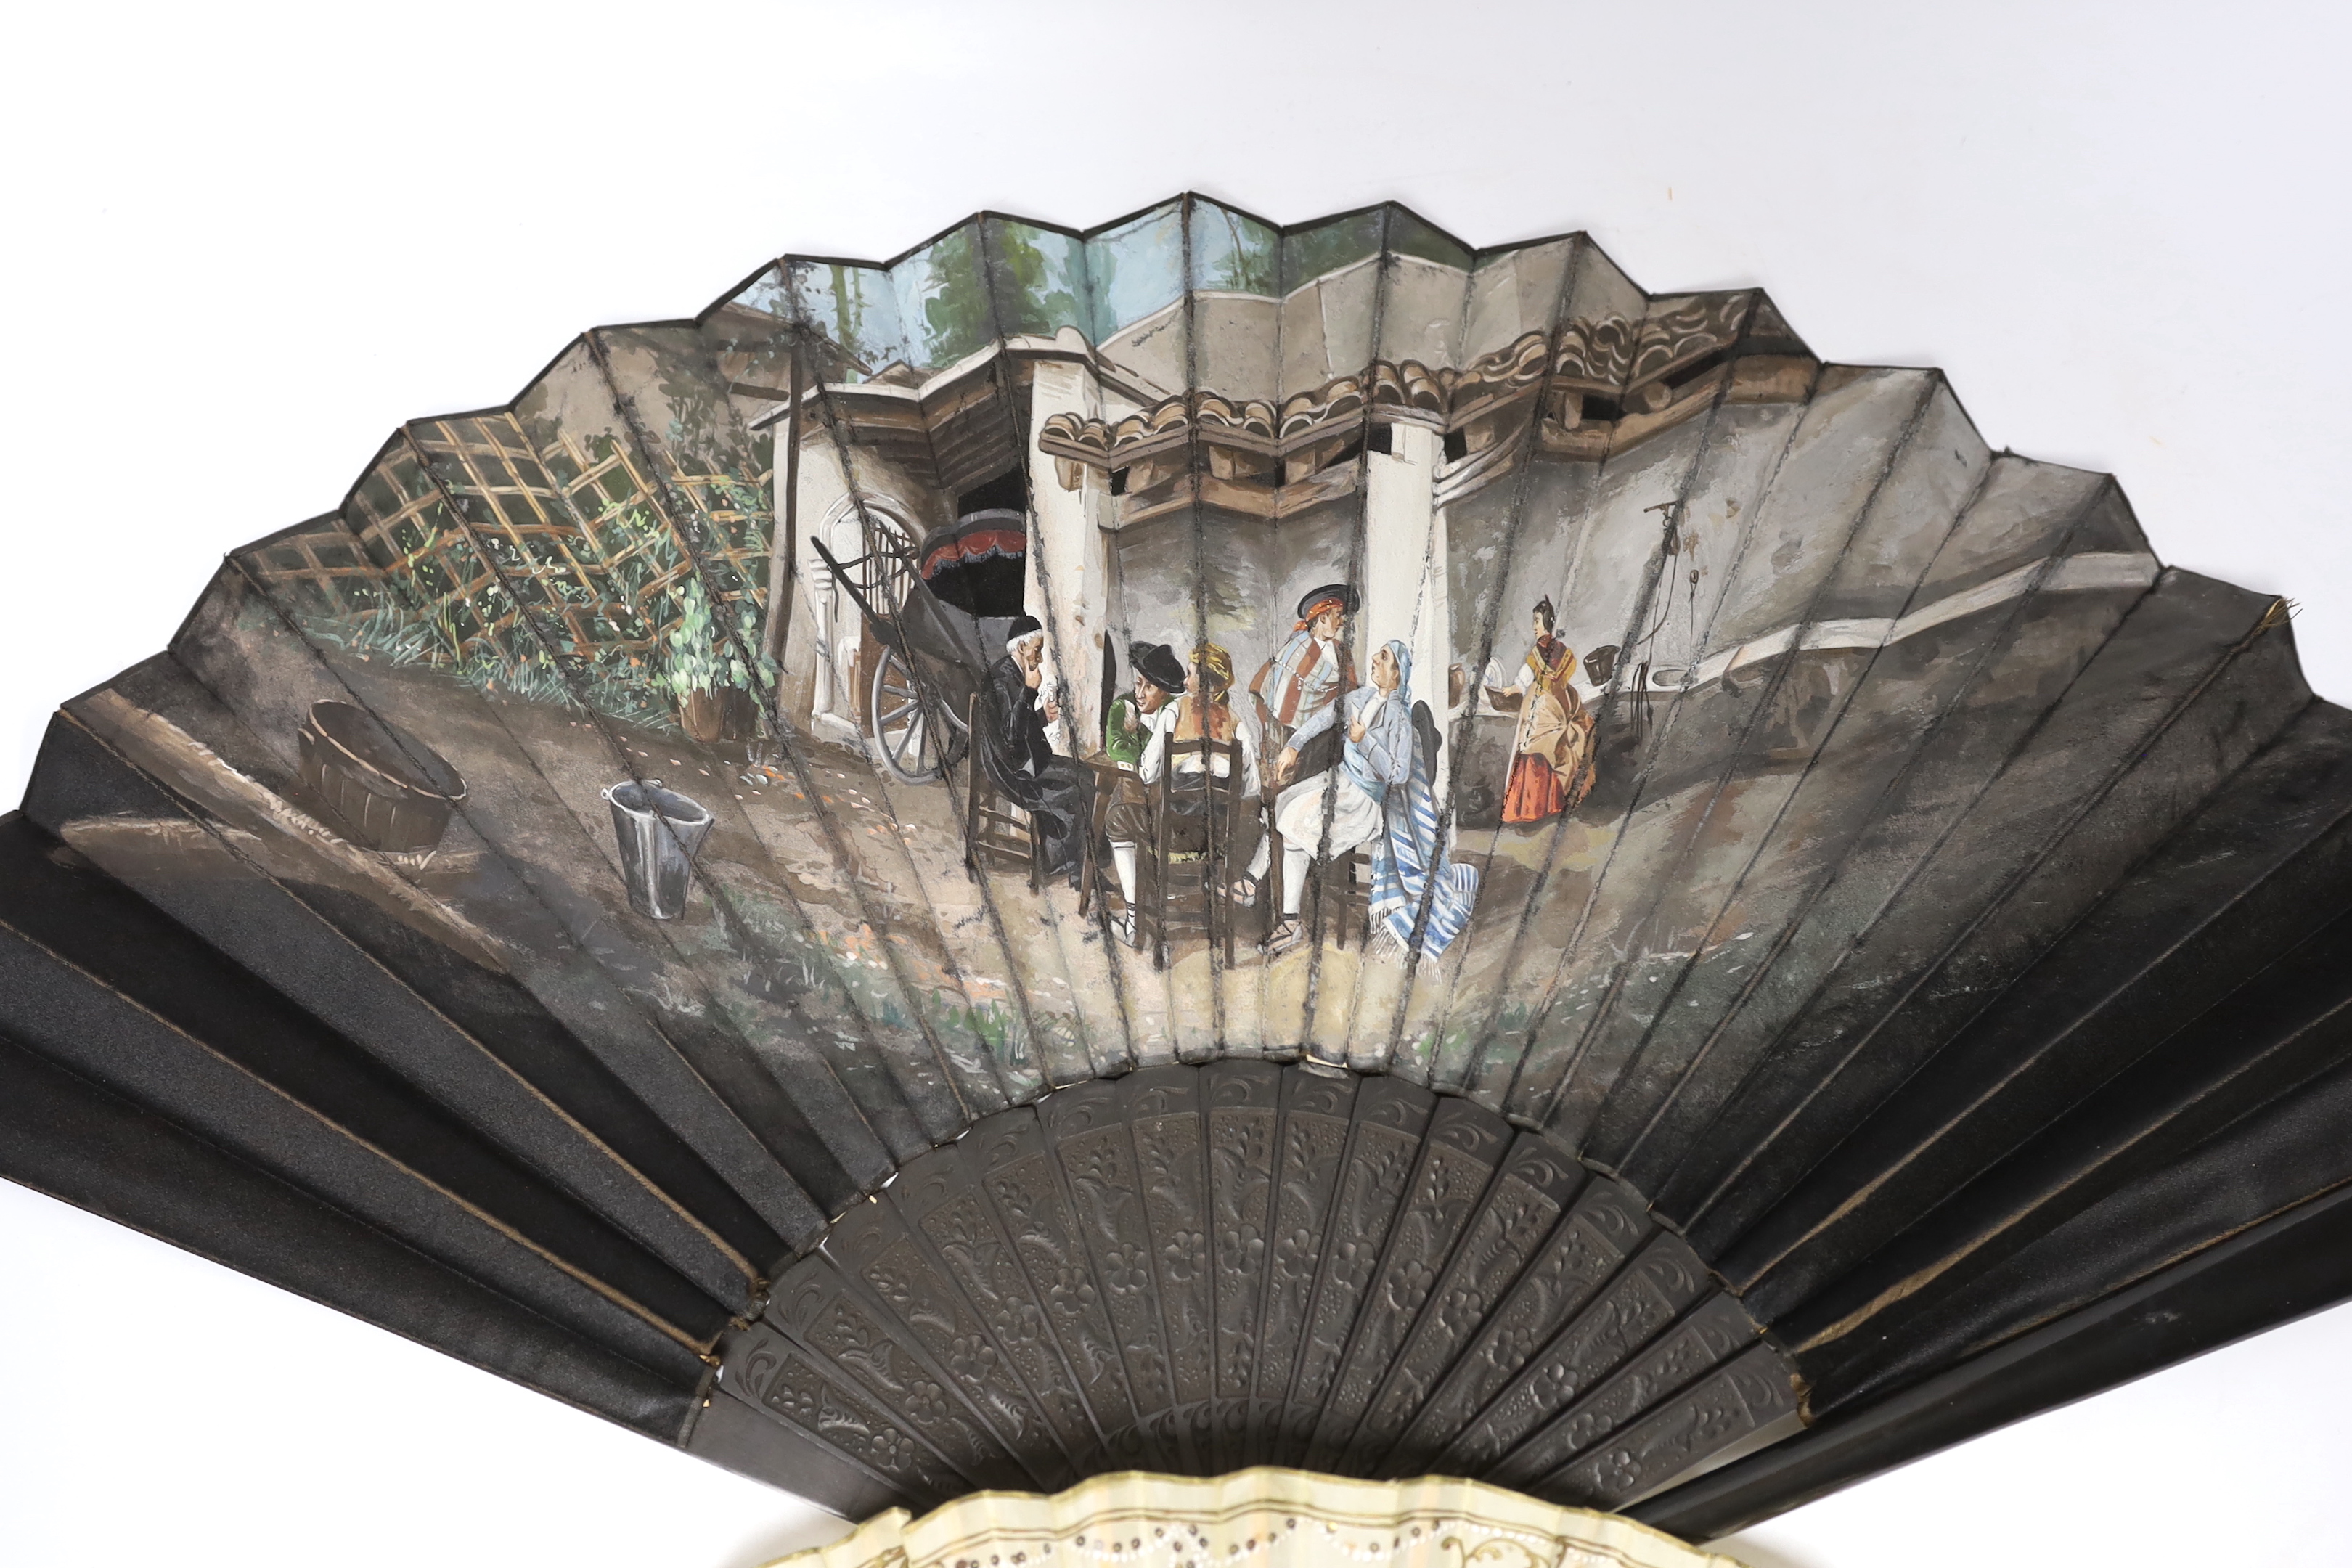 A French 19th century bone and sequin fan and a Spanish figurative leaf fan with ebony guards